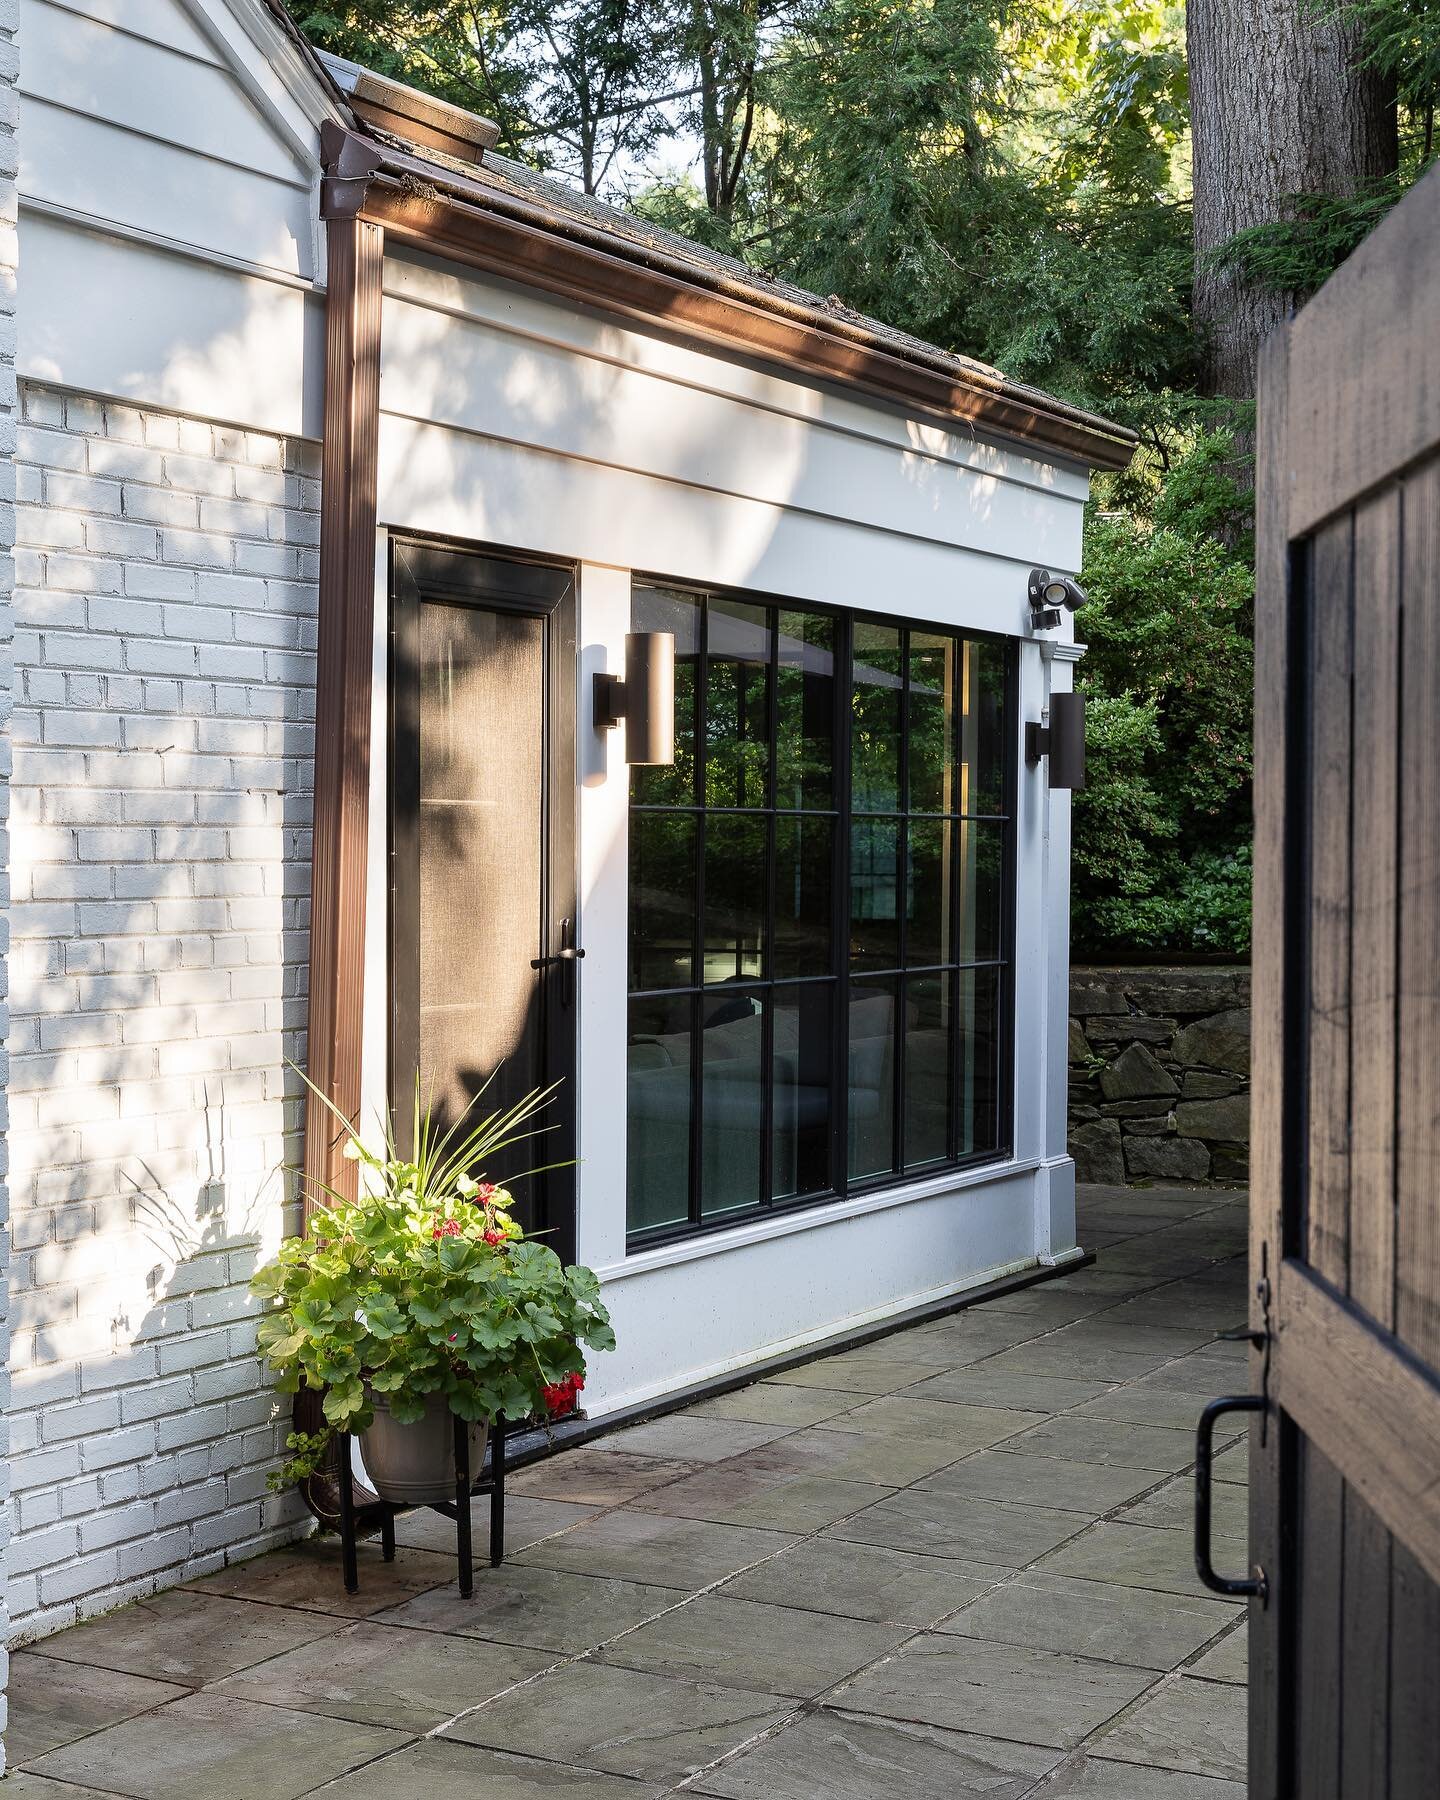 SPRING VALLEY RENO &bull; this rambler needed some love and attention so we cleaned up the exterior, painted, over grouted the stone and replaced all the windows 

Design : @thirdstreetarchitecture 
Build : @kraydibuilders 
Photographer : @christykos